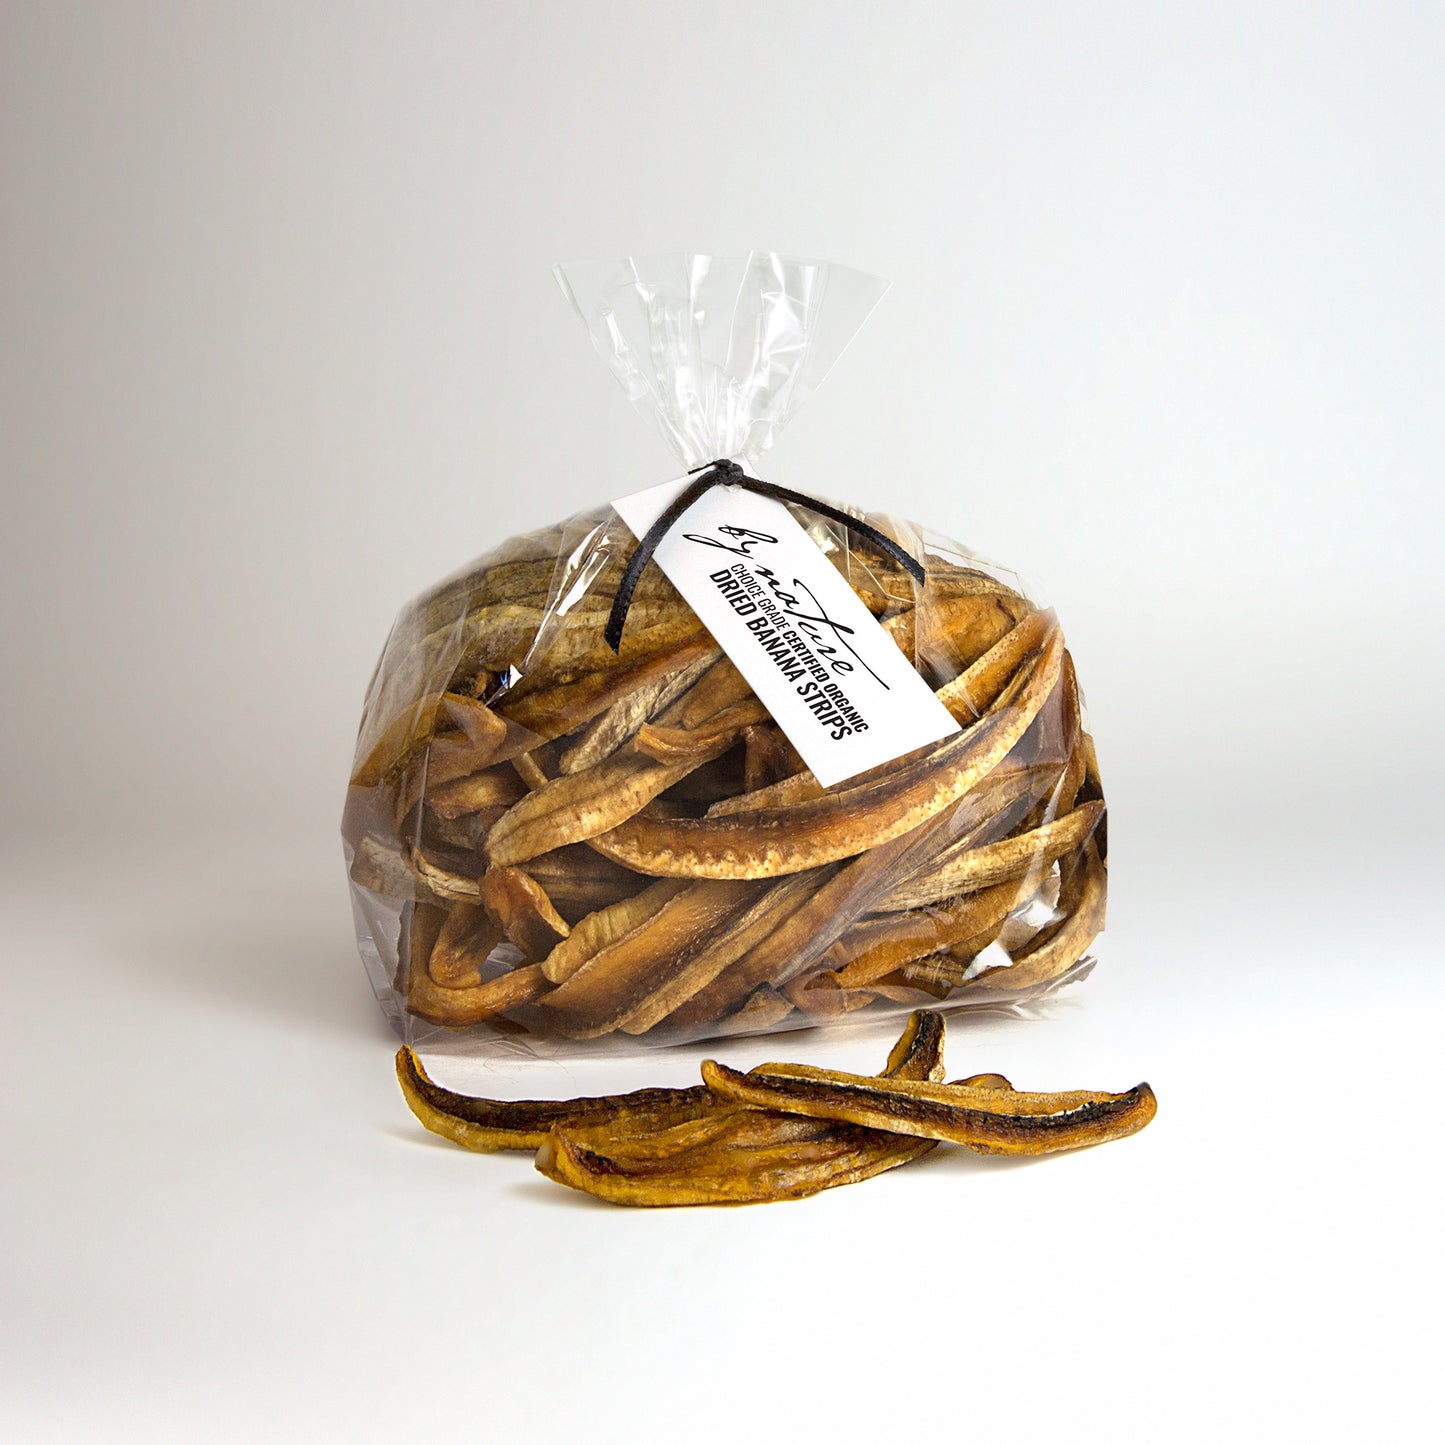 BY NATURE Dried Banana Strips, 250g - certified organic at source, preservative-free.